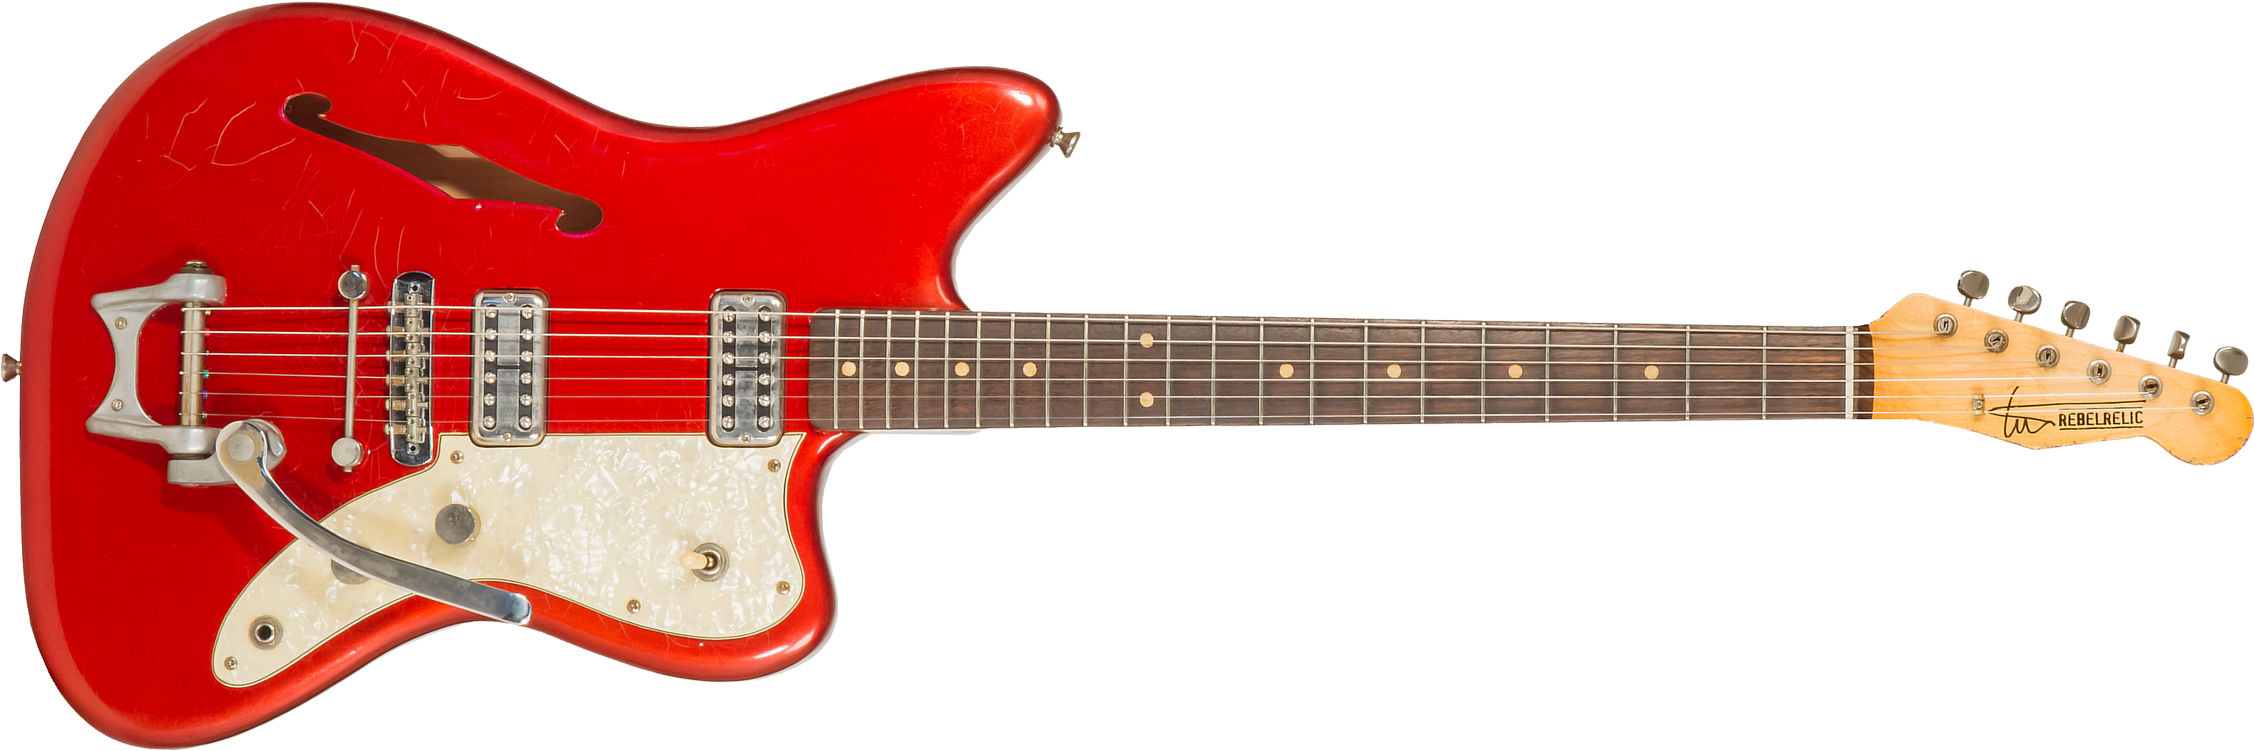 Rebelrelic Wrangler 2h Trem Rw #62175 - Light Aged Candy Apple Red - Semi-hollow electric guitar - Main picture